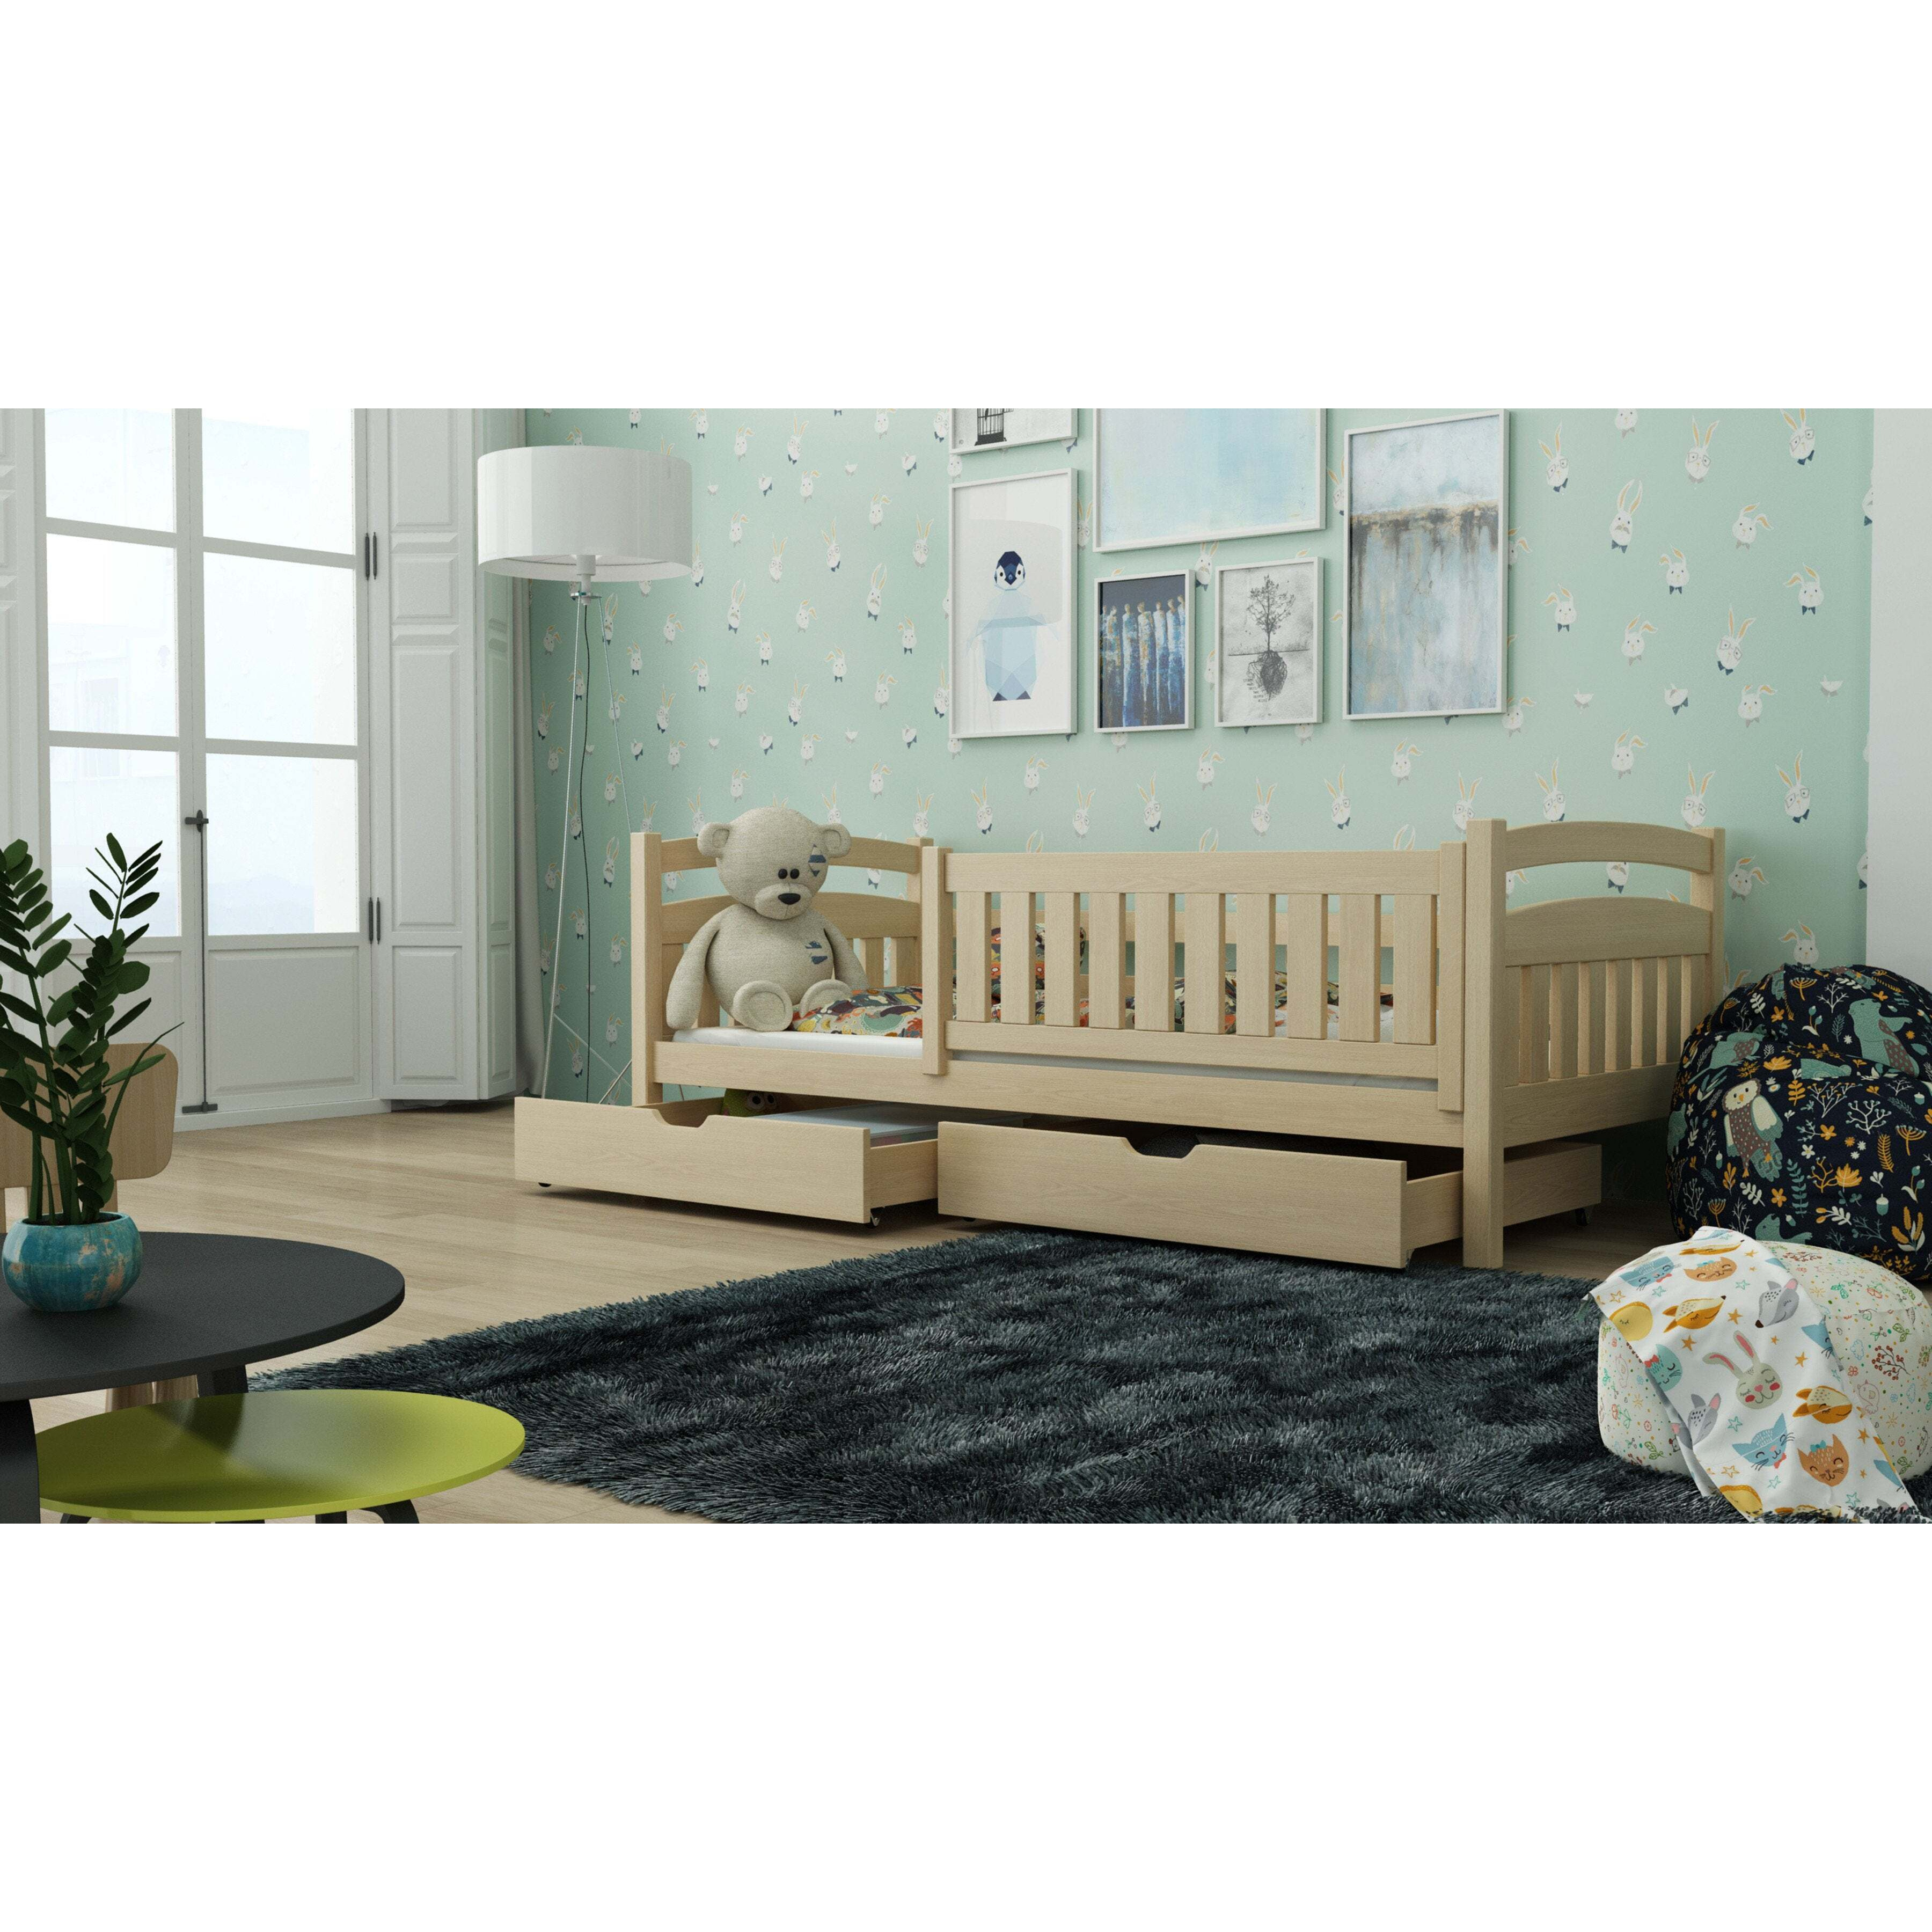 Wooden Bed Terry with Storage - Pine Foam Mattresses - image 1